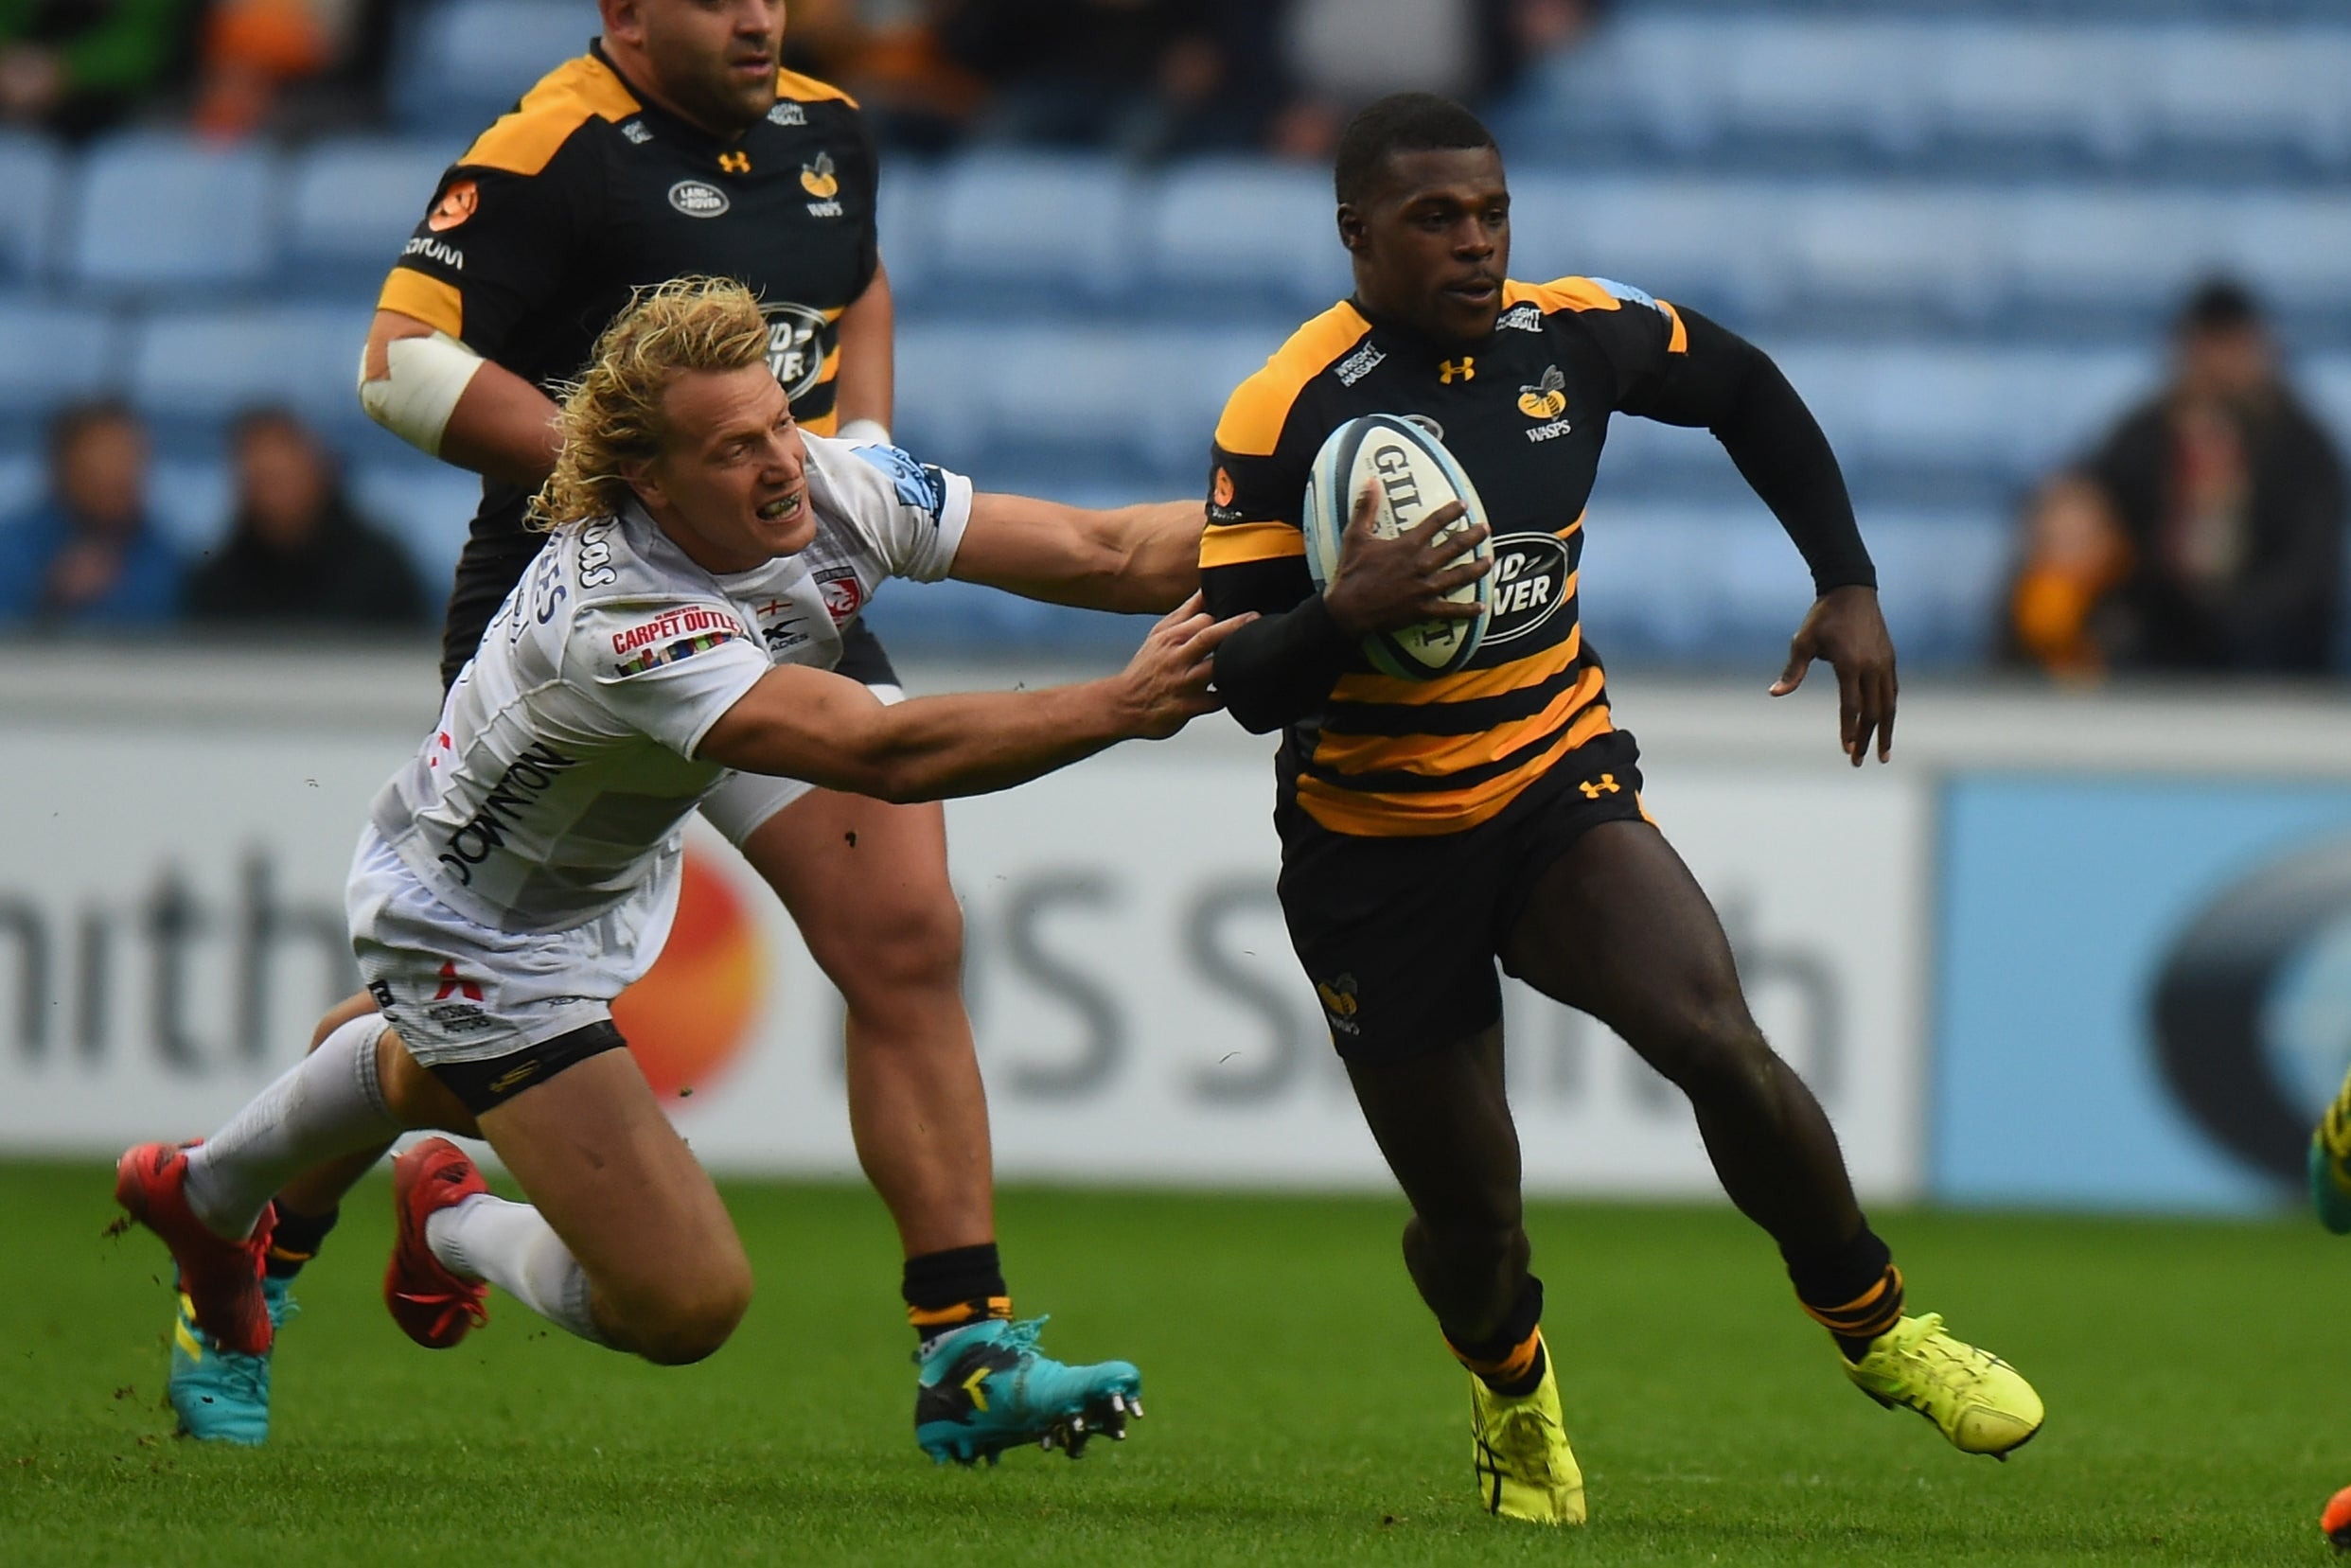 Ex-Wasps star Christian Wade will join Gloucester